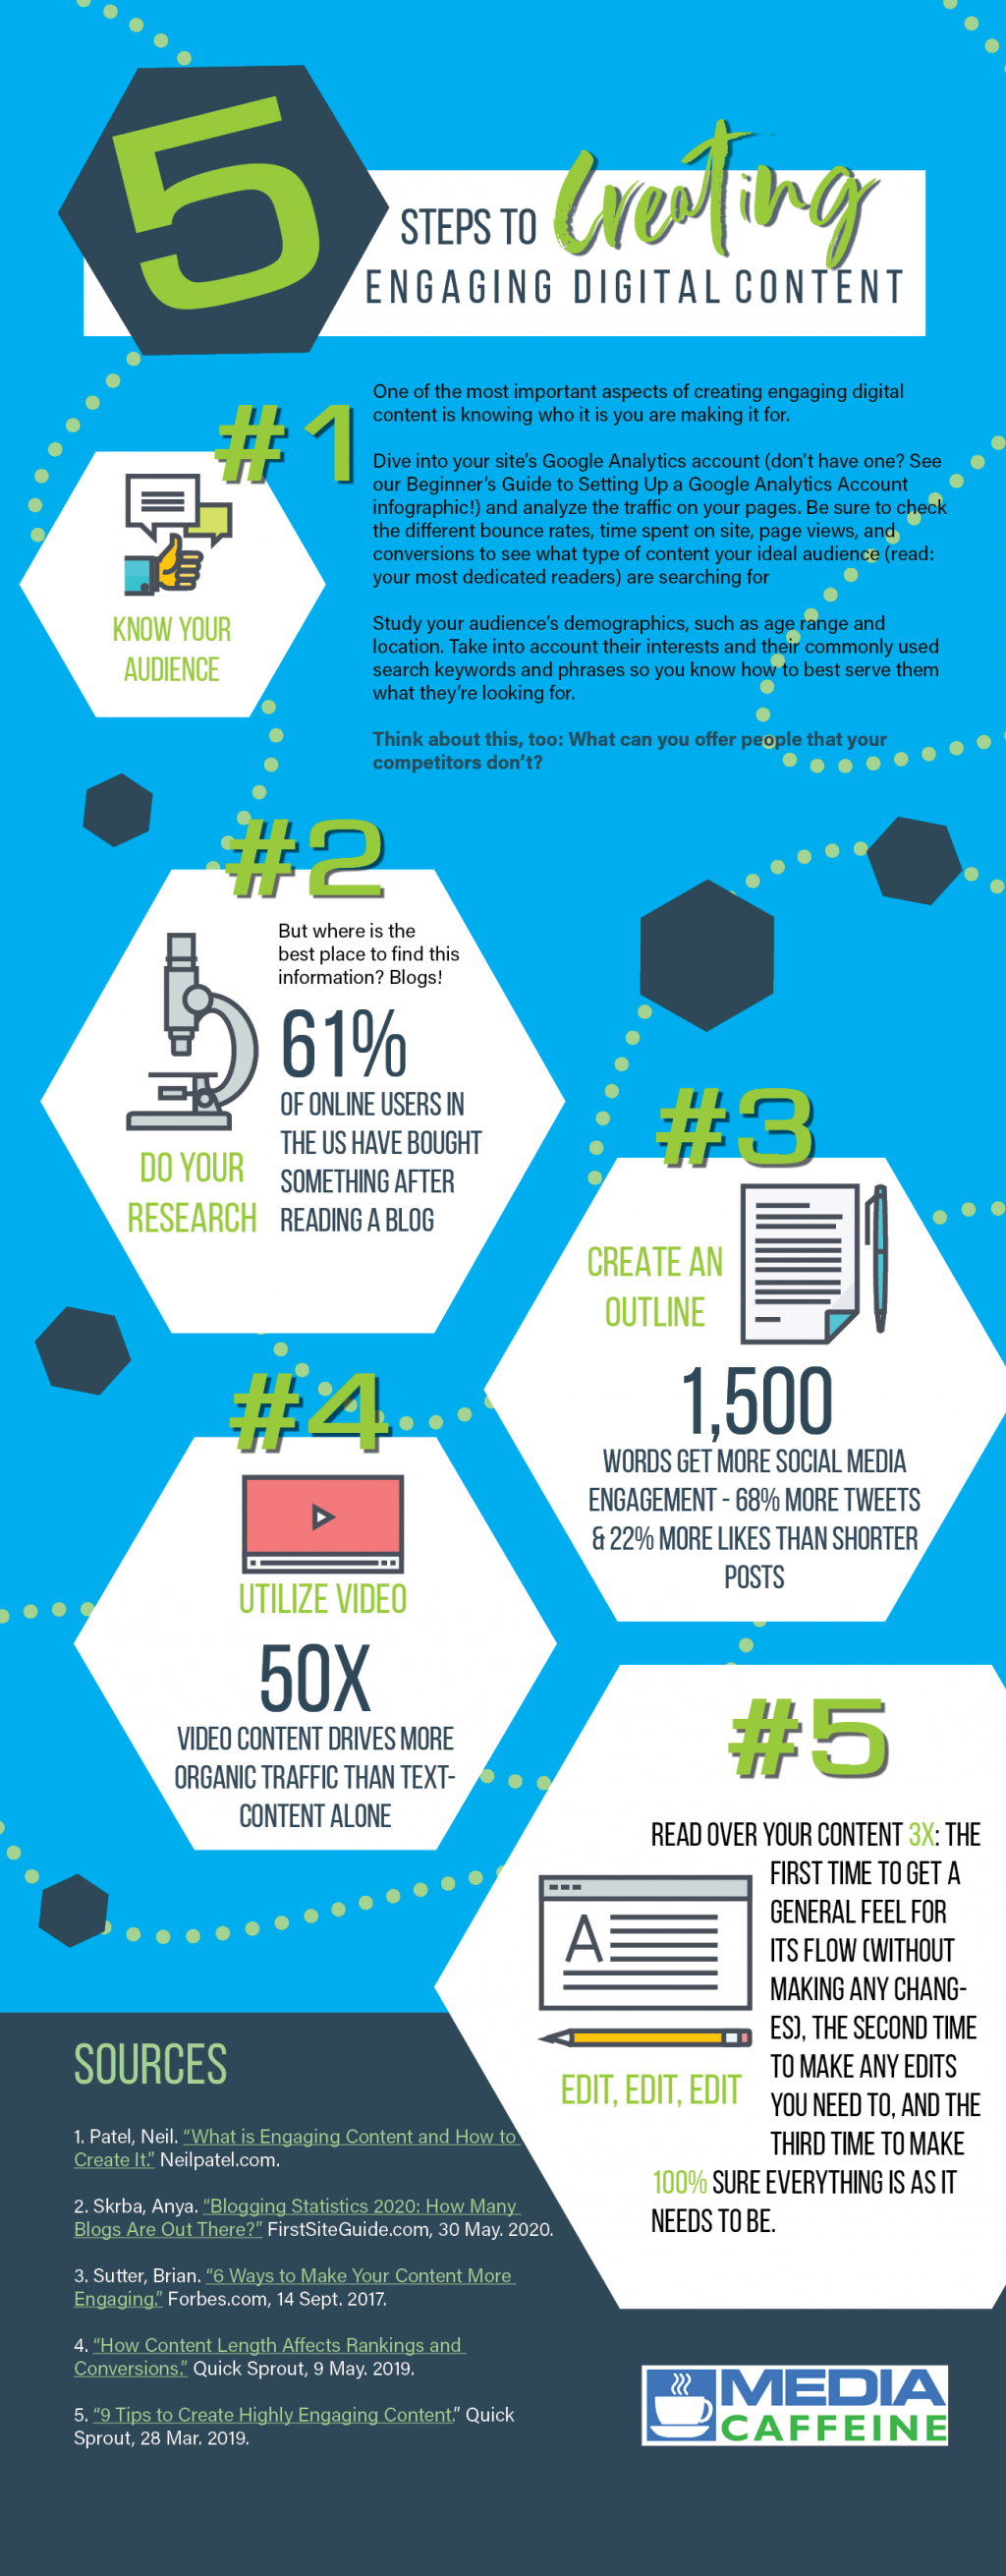 5 Steps to creating engaging digital content infographic